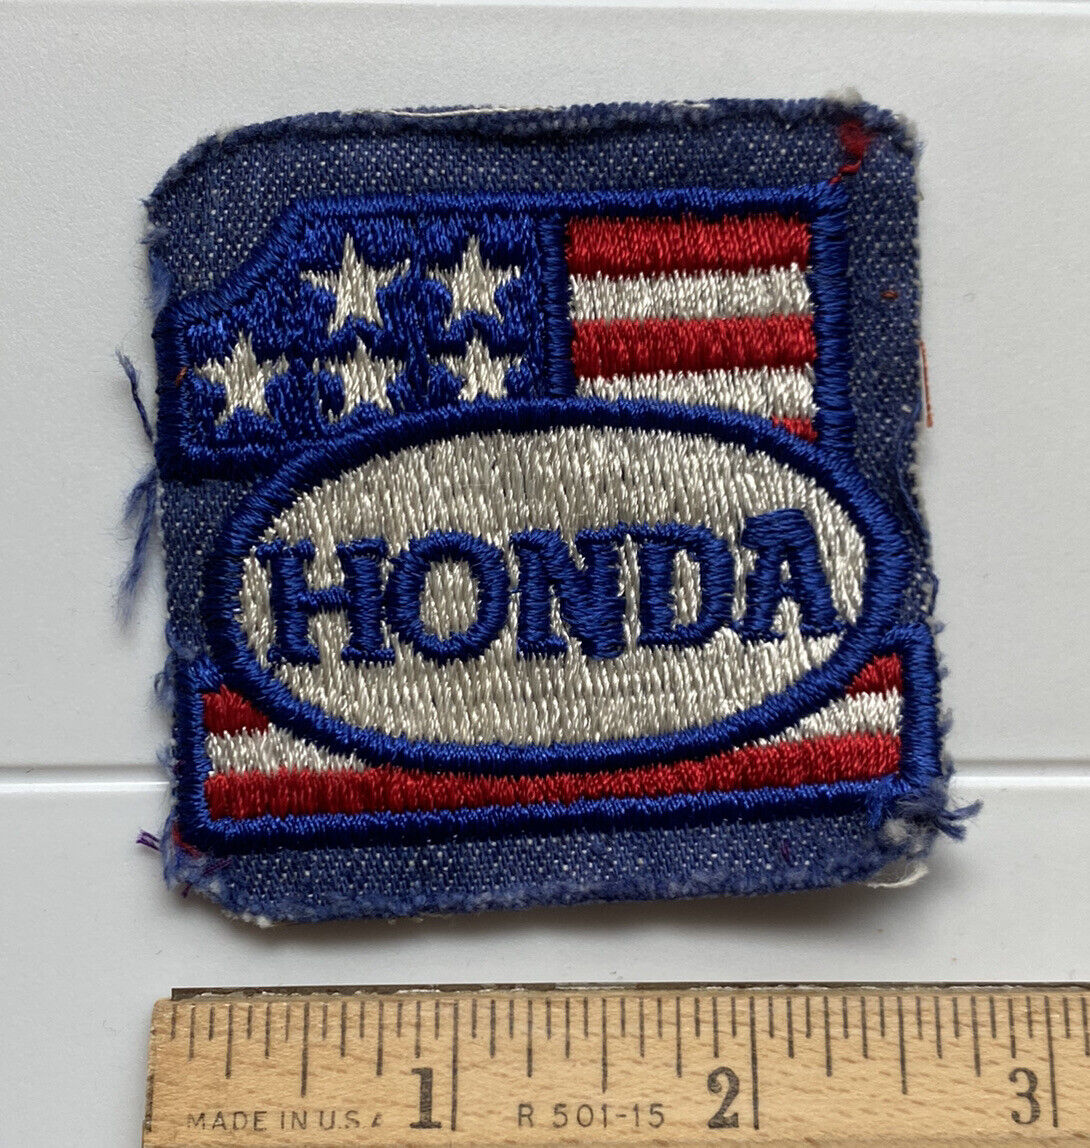 Honda # 1 Motorcycles American Flag Stars Stripes Denim Blue Embroidered Patch